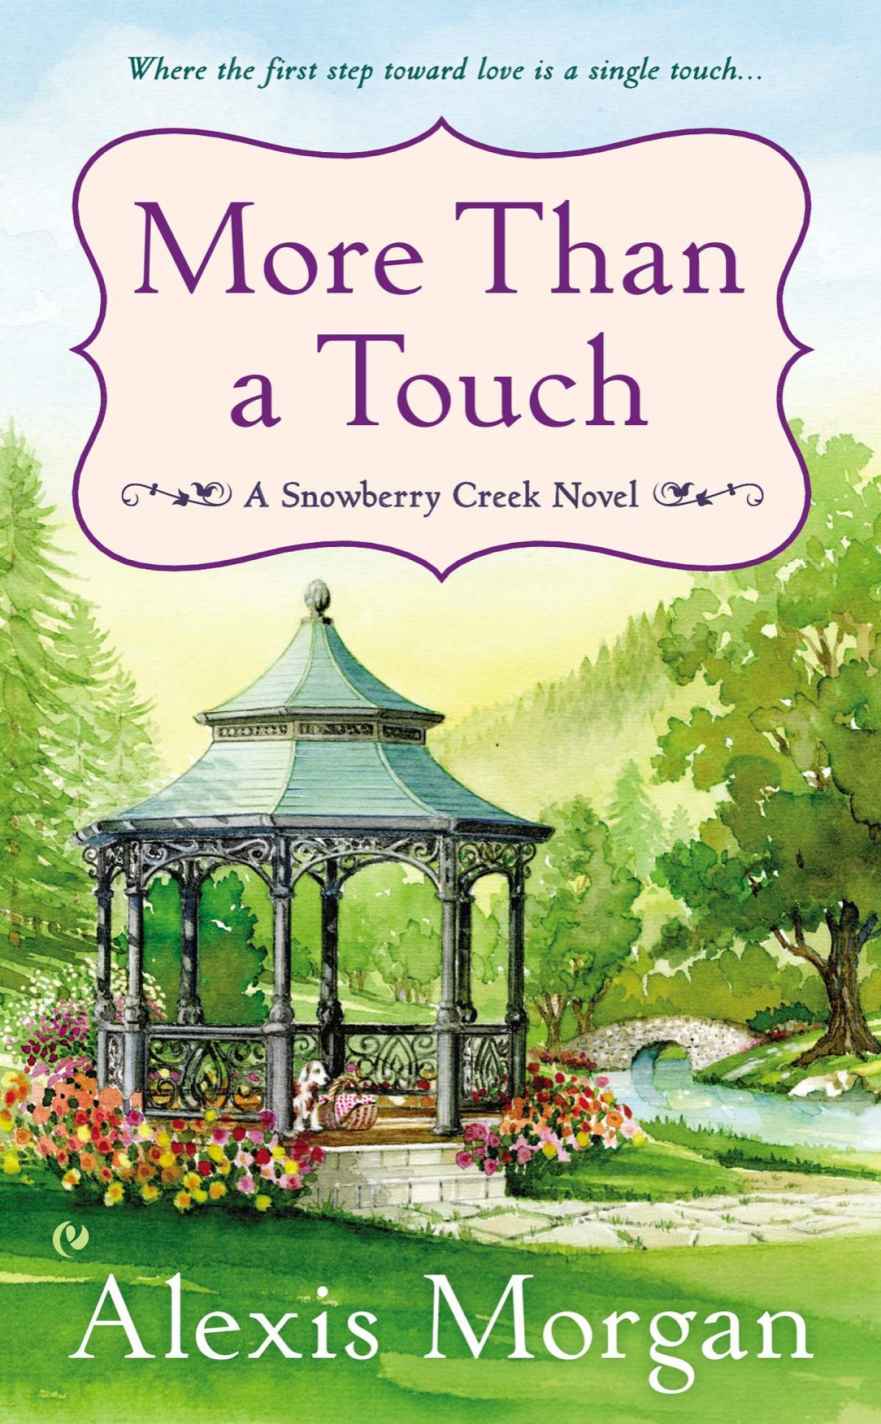 More Than a Touch (Snowberry Creek #2)